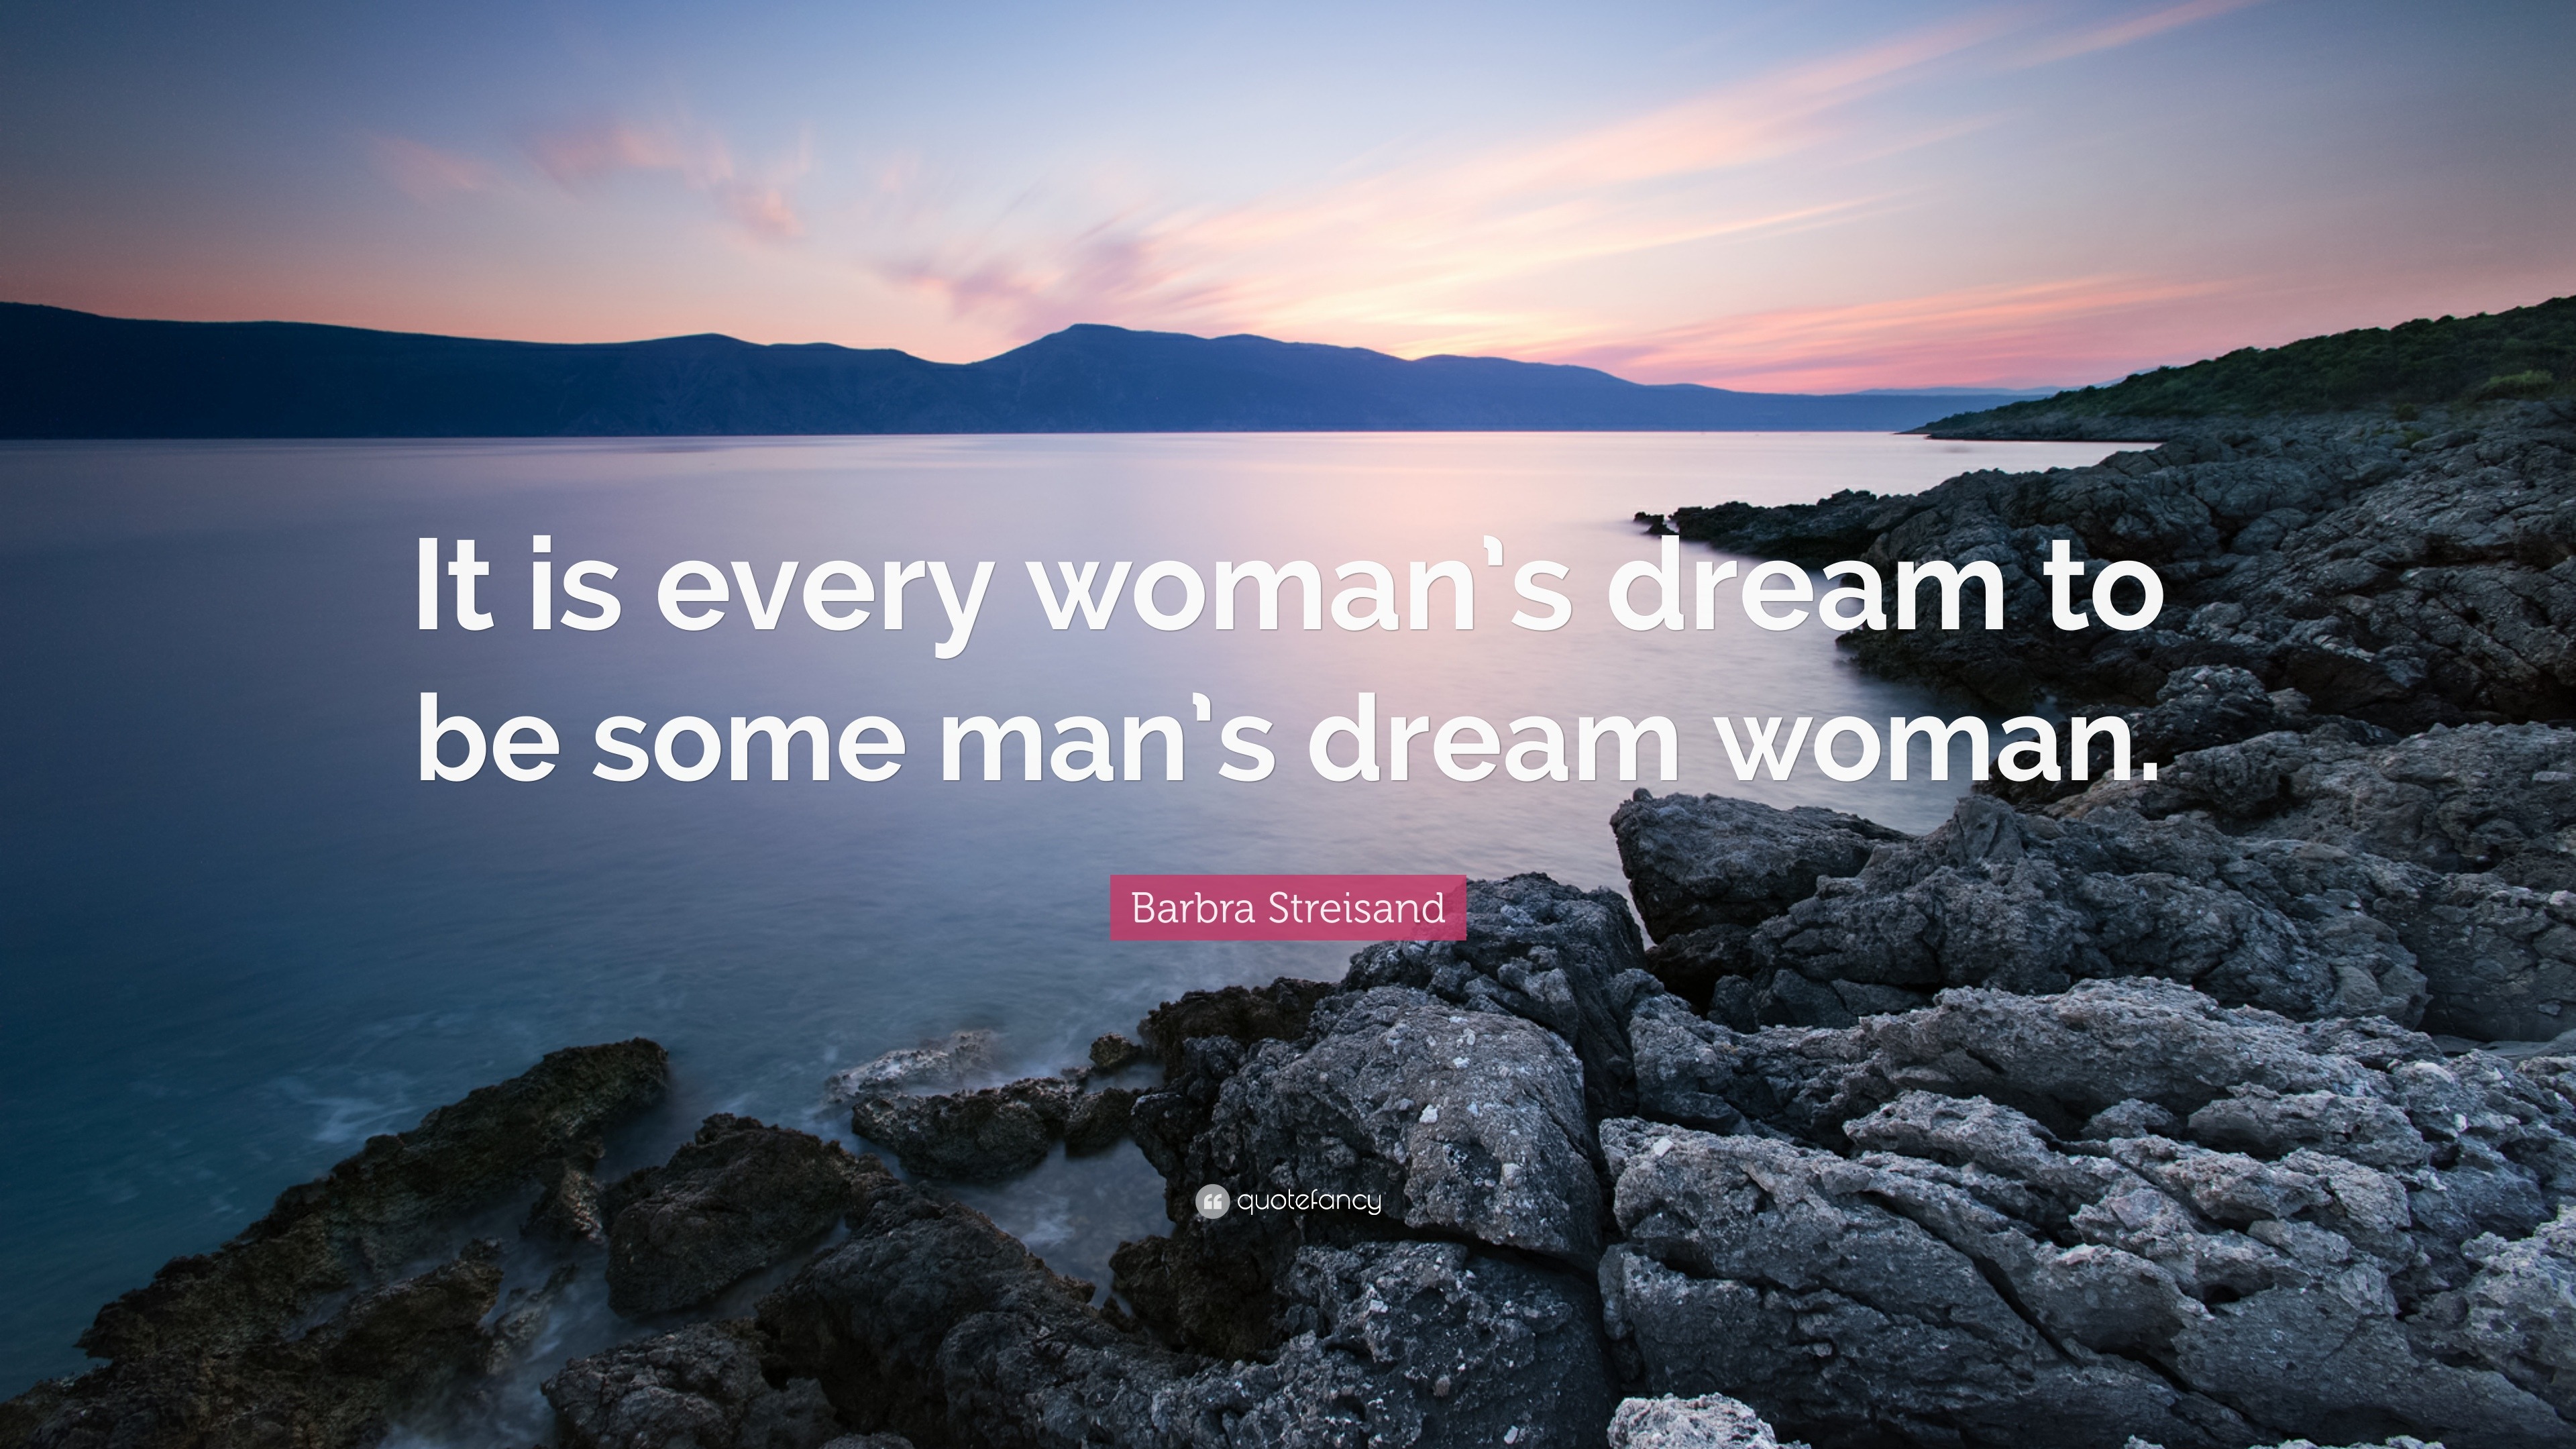 Barbra Streisand Quote: “It is every woman’s dream to be some man’s ...